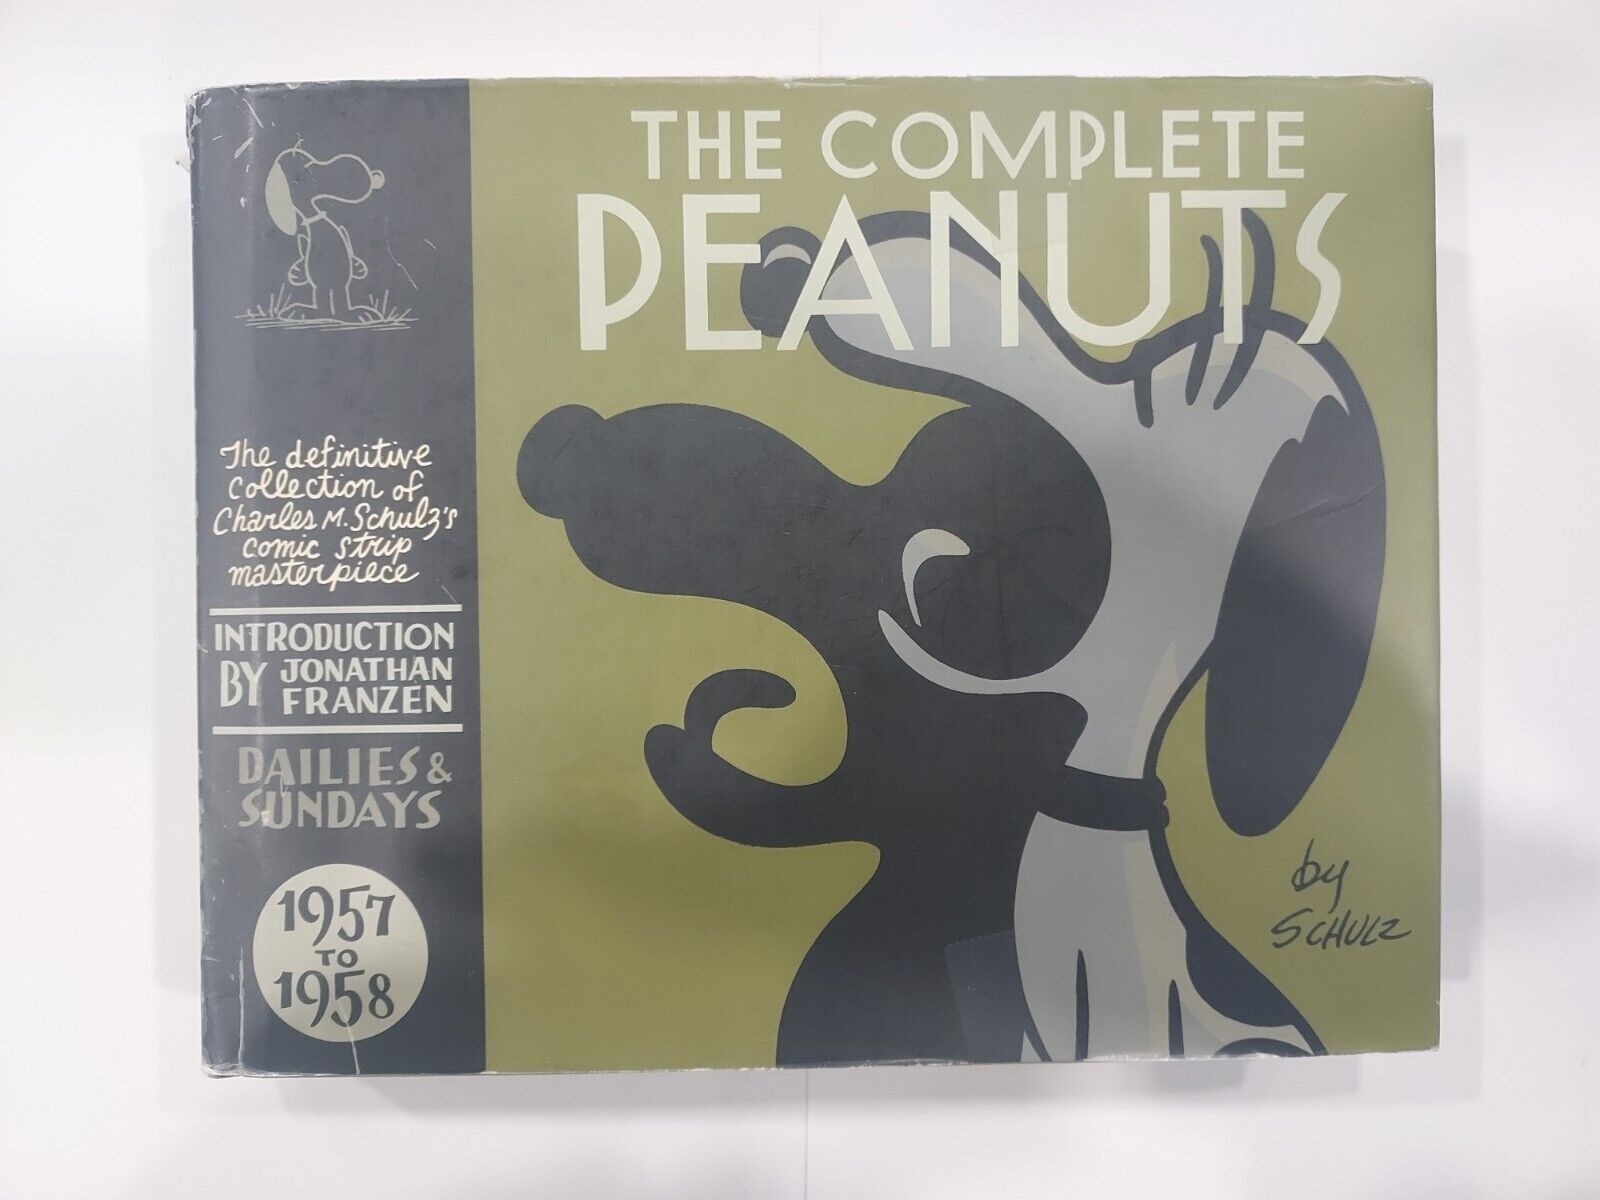 The Complete Peanuts 1957-1958: Vol. 4 Hardcover Edition by Charles M Schulz